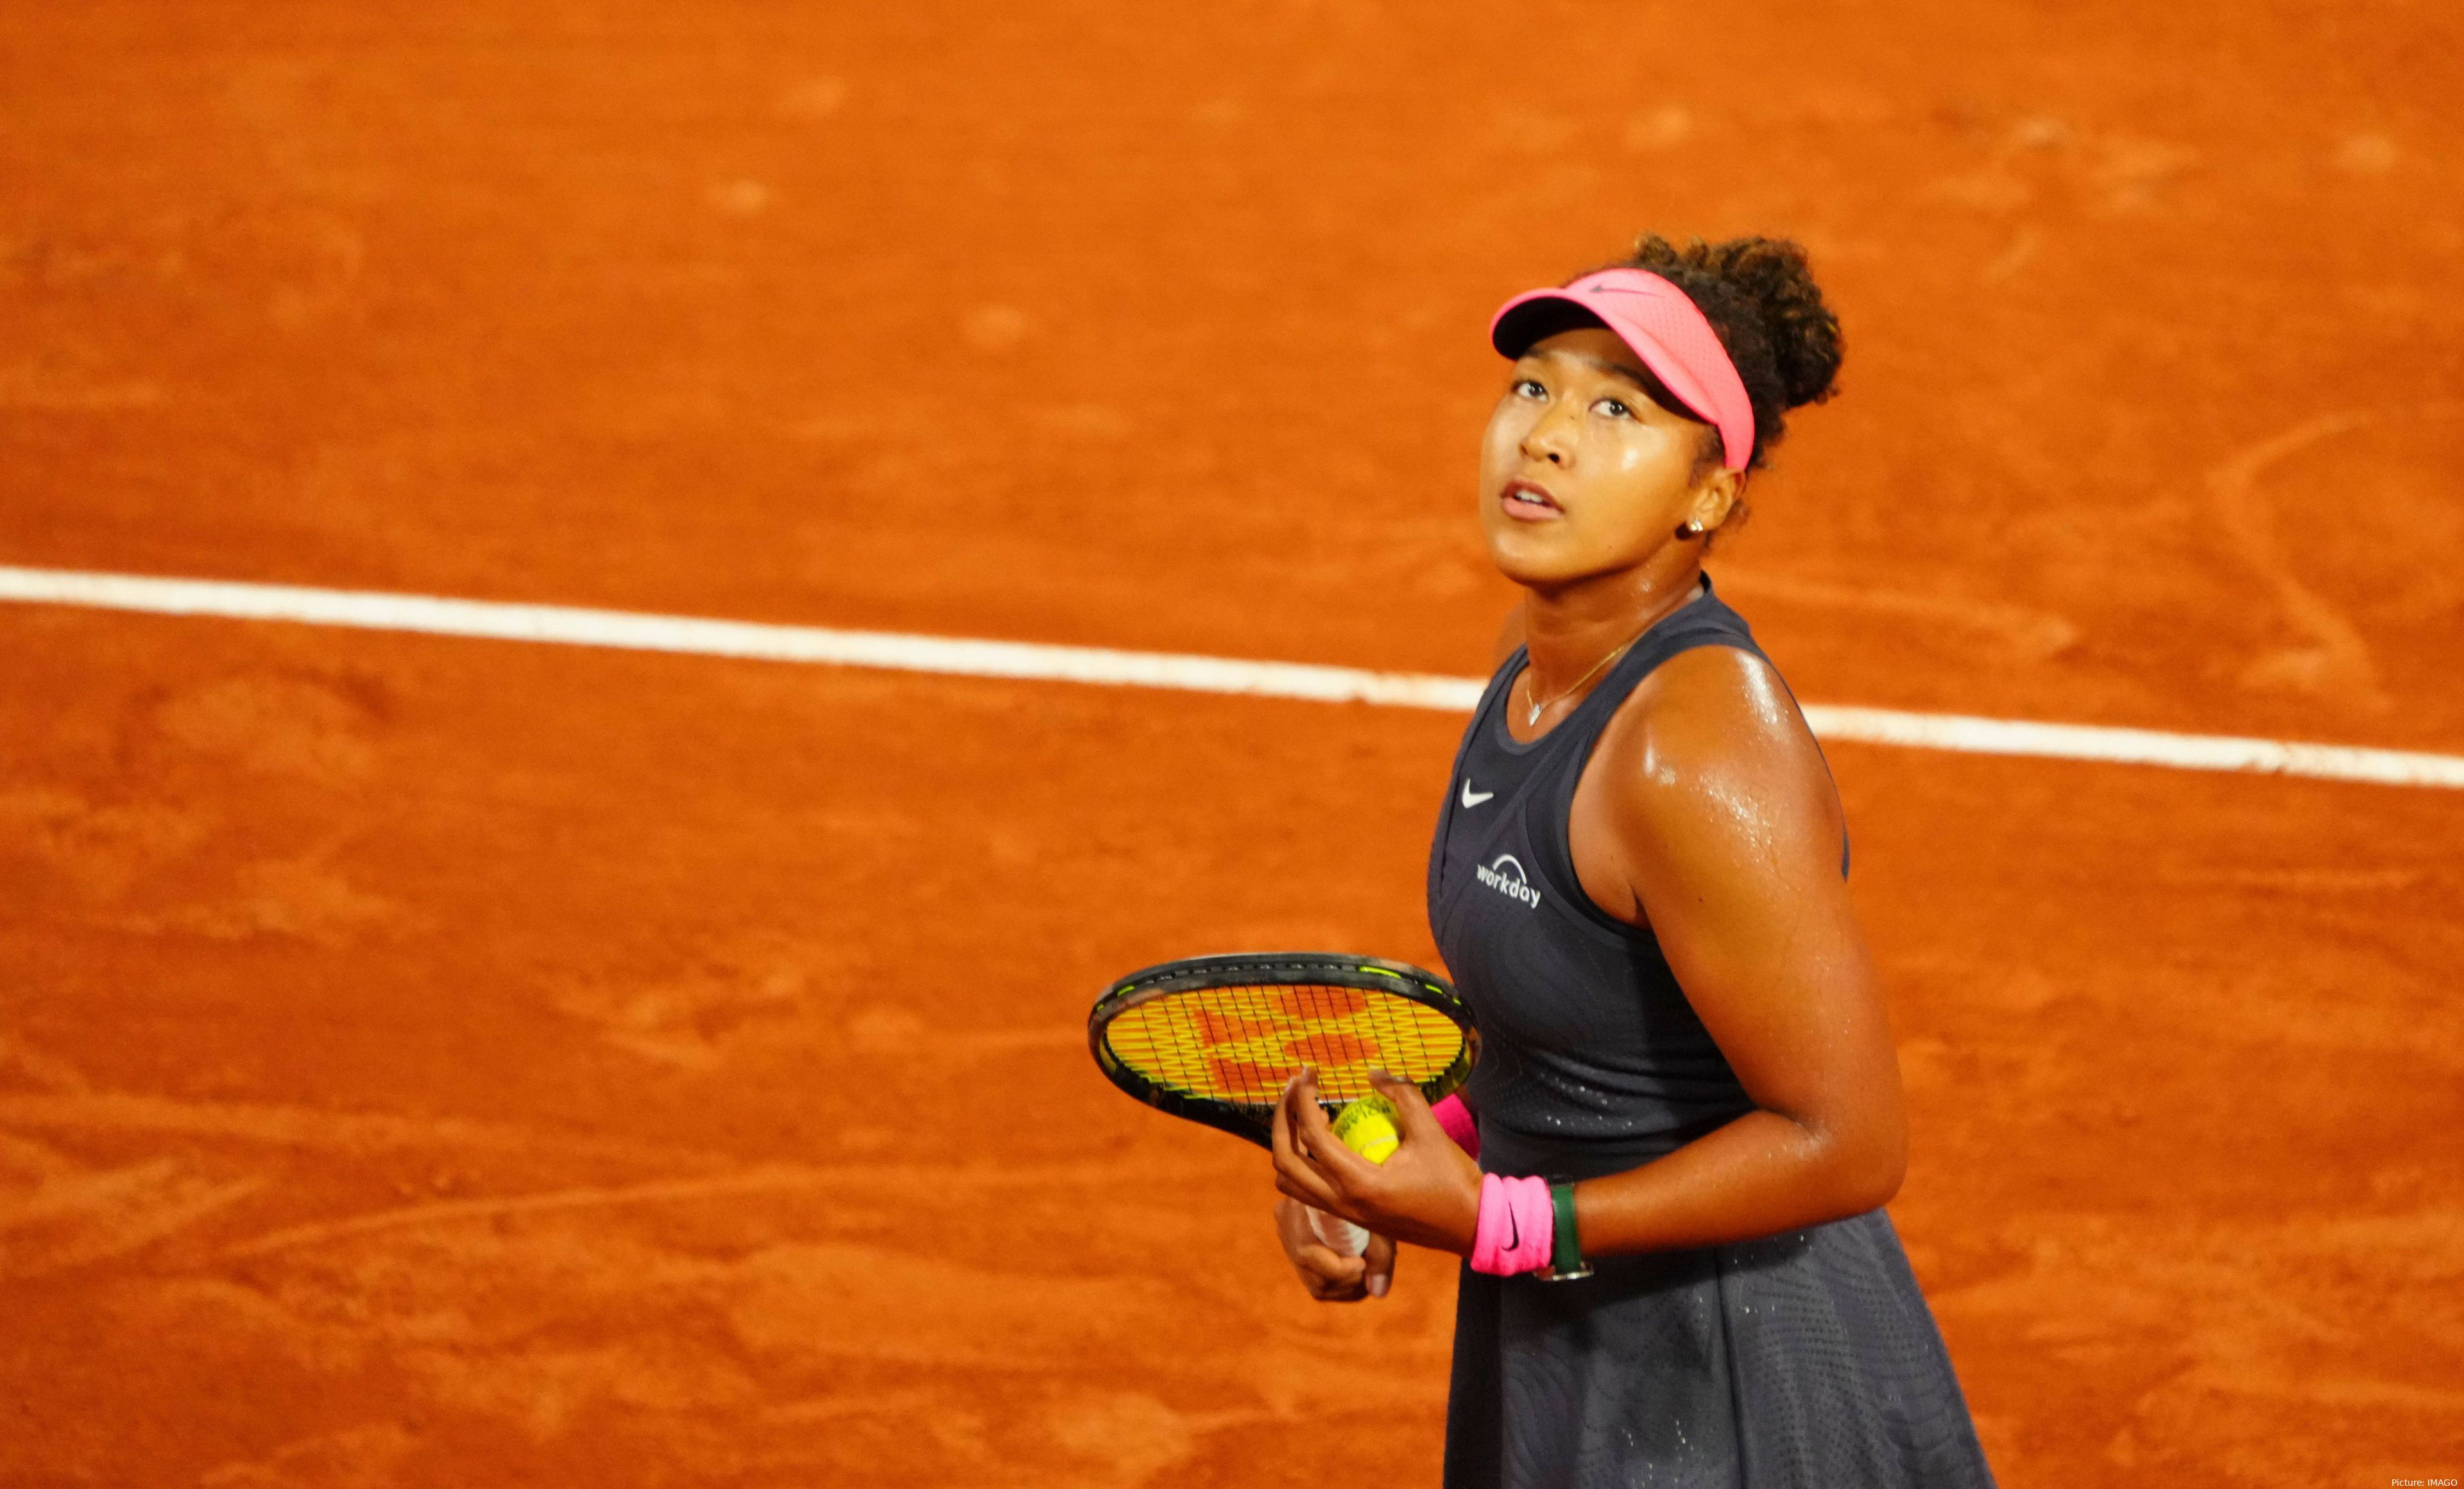 Naomi Osaka continues tennis comeback and first grass action in many years.